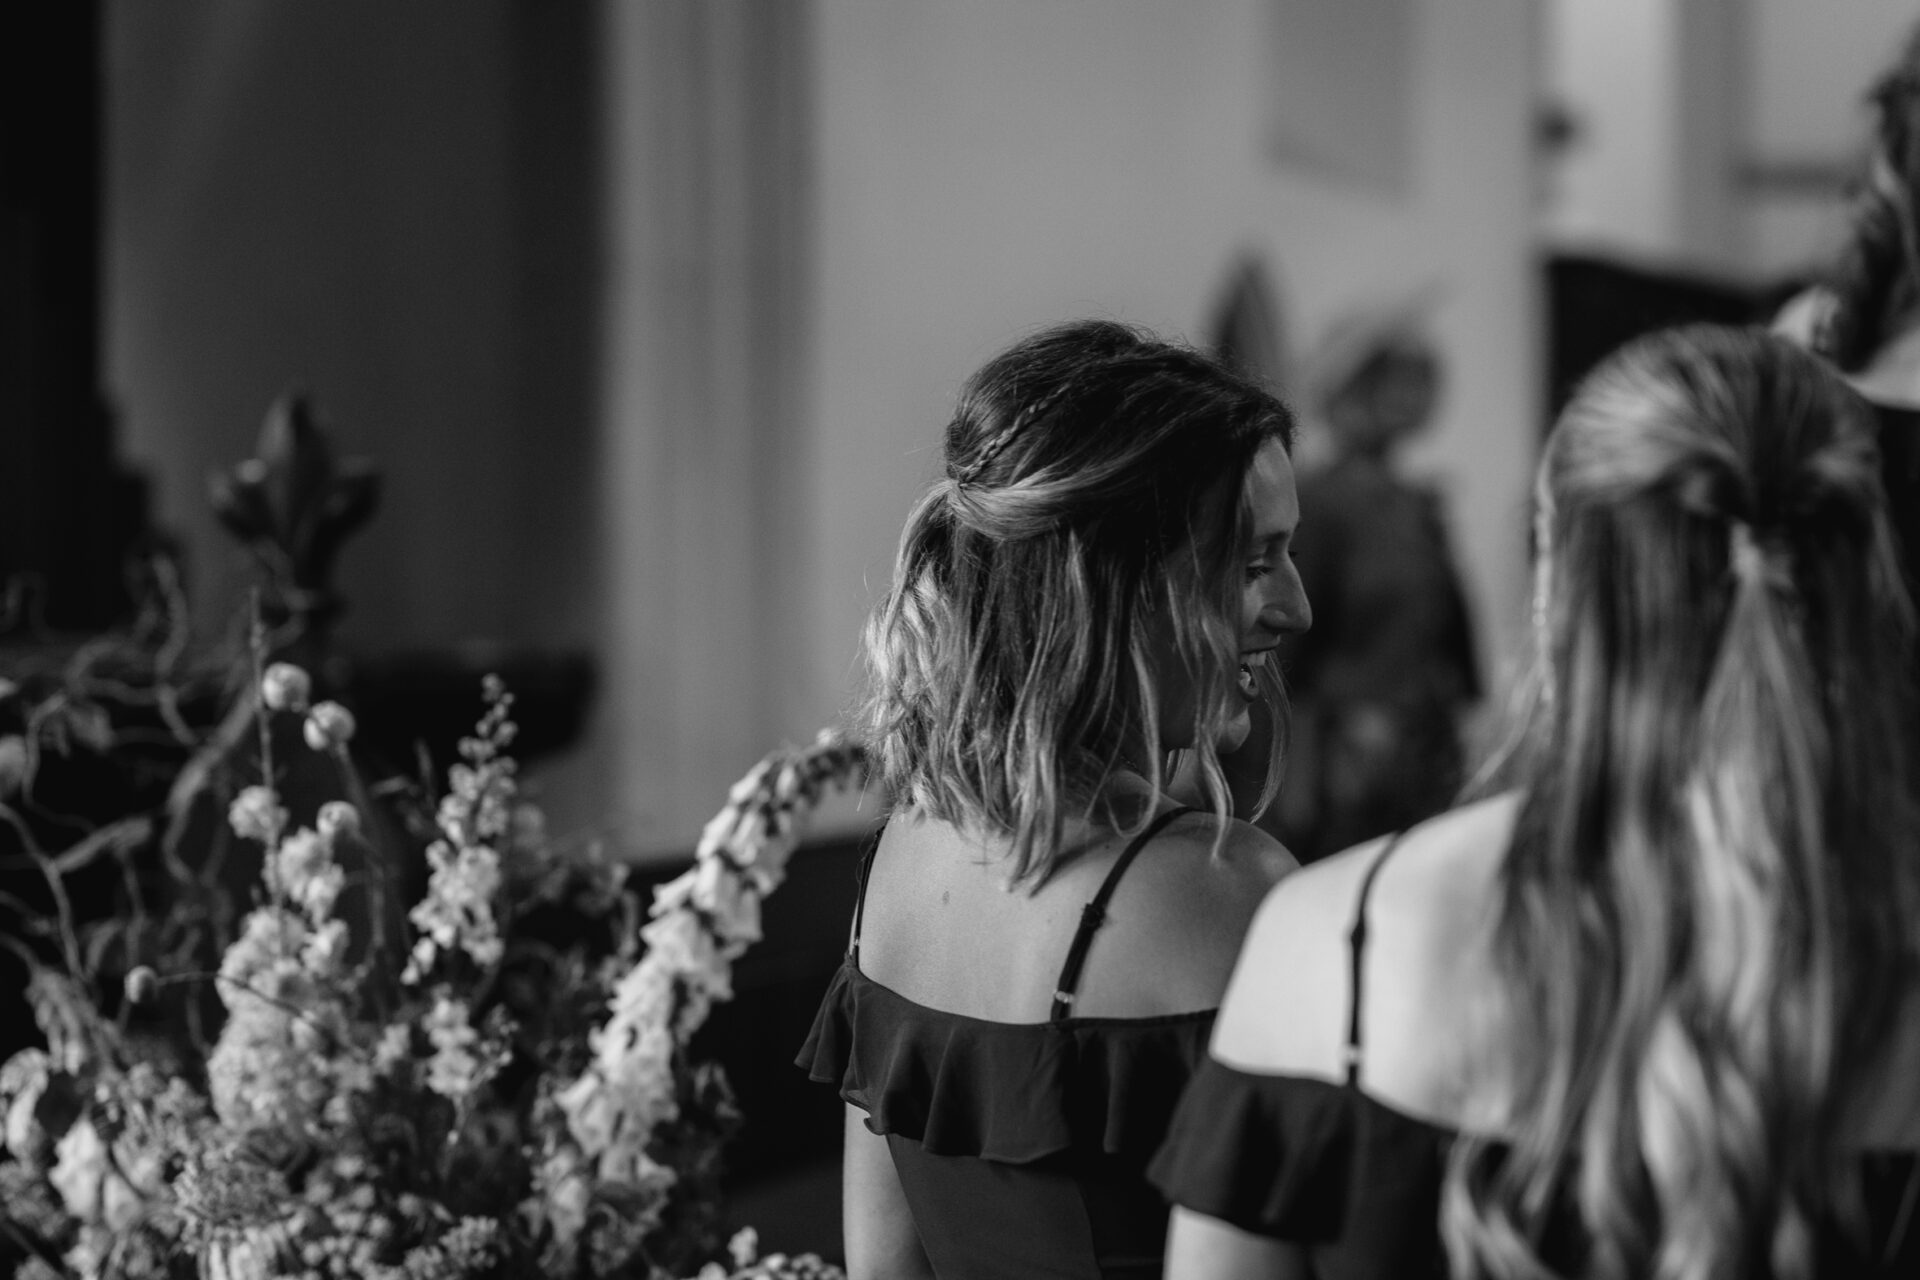 The bridesmaids share a laugh during the Devon church wedding ceremony